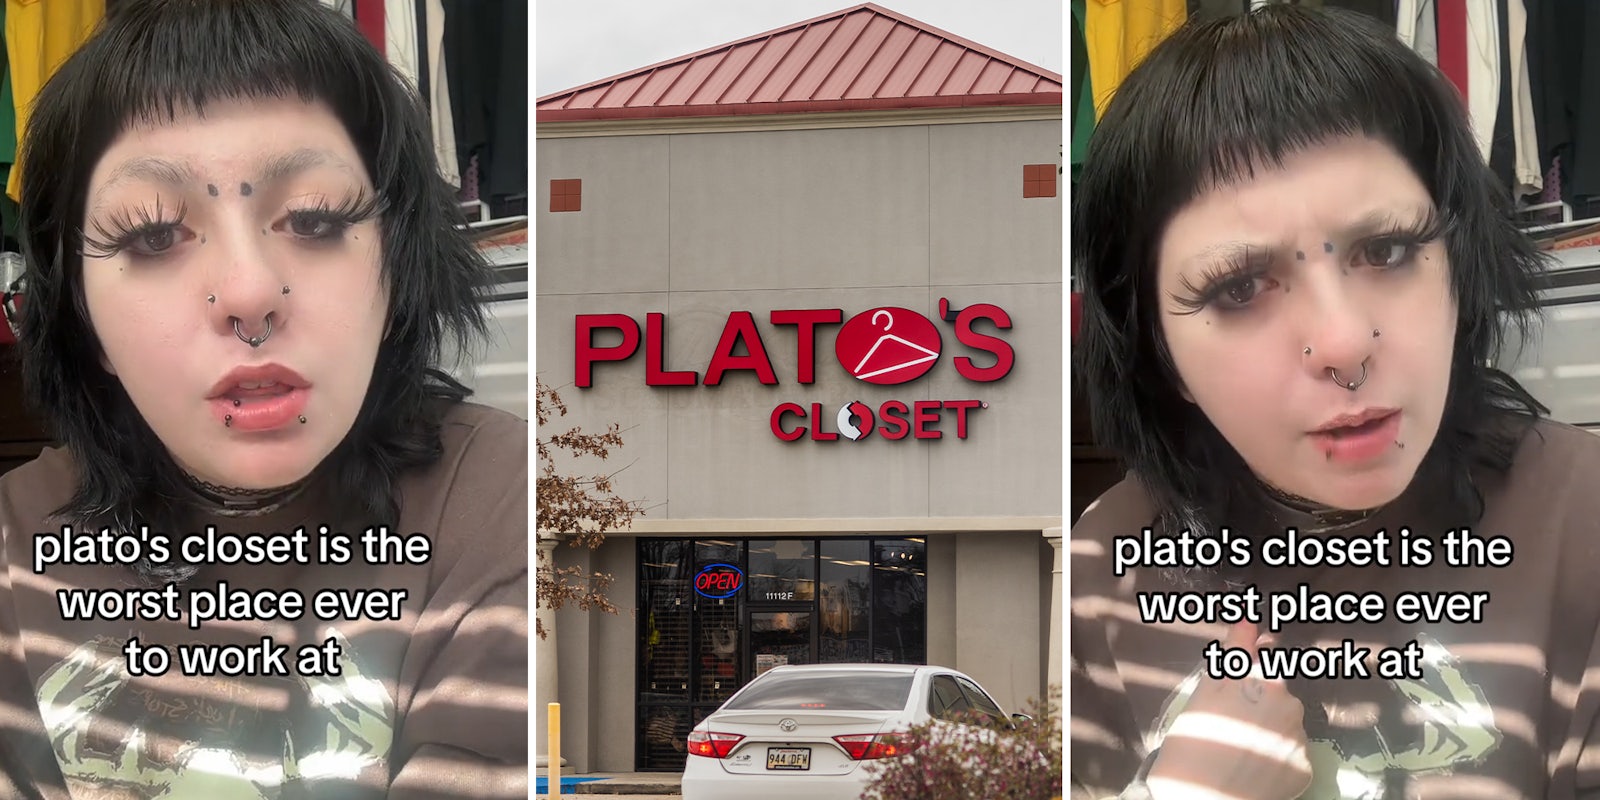 Plato’s Closet worker says she was fired for not bringing a doctor’s note when she had a fever